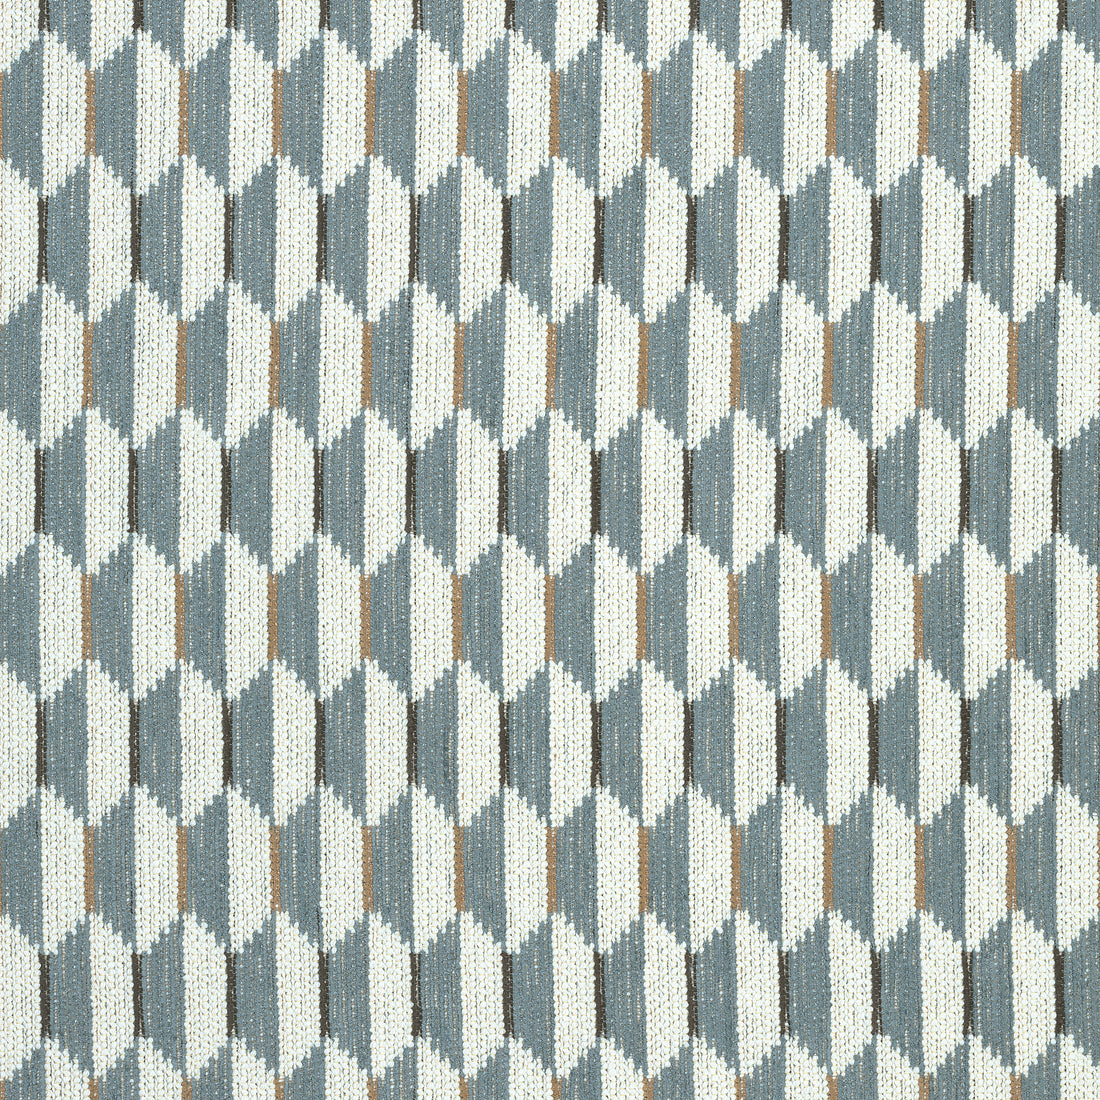 Optica fabric in aqua color - pattern number W73354 - by Thibaut in the Nomad collection